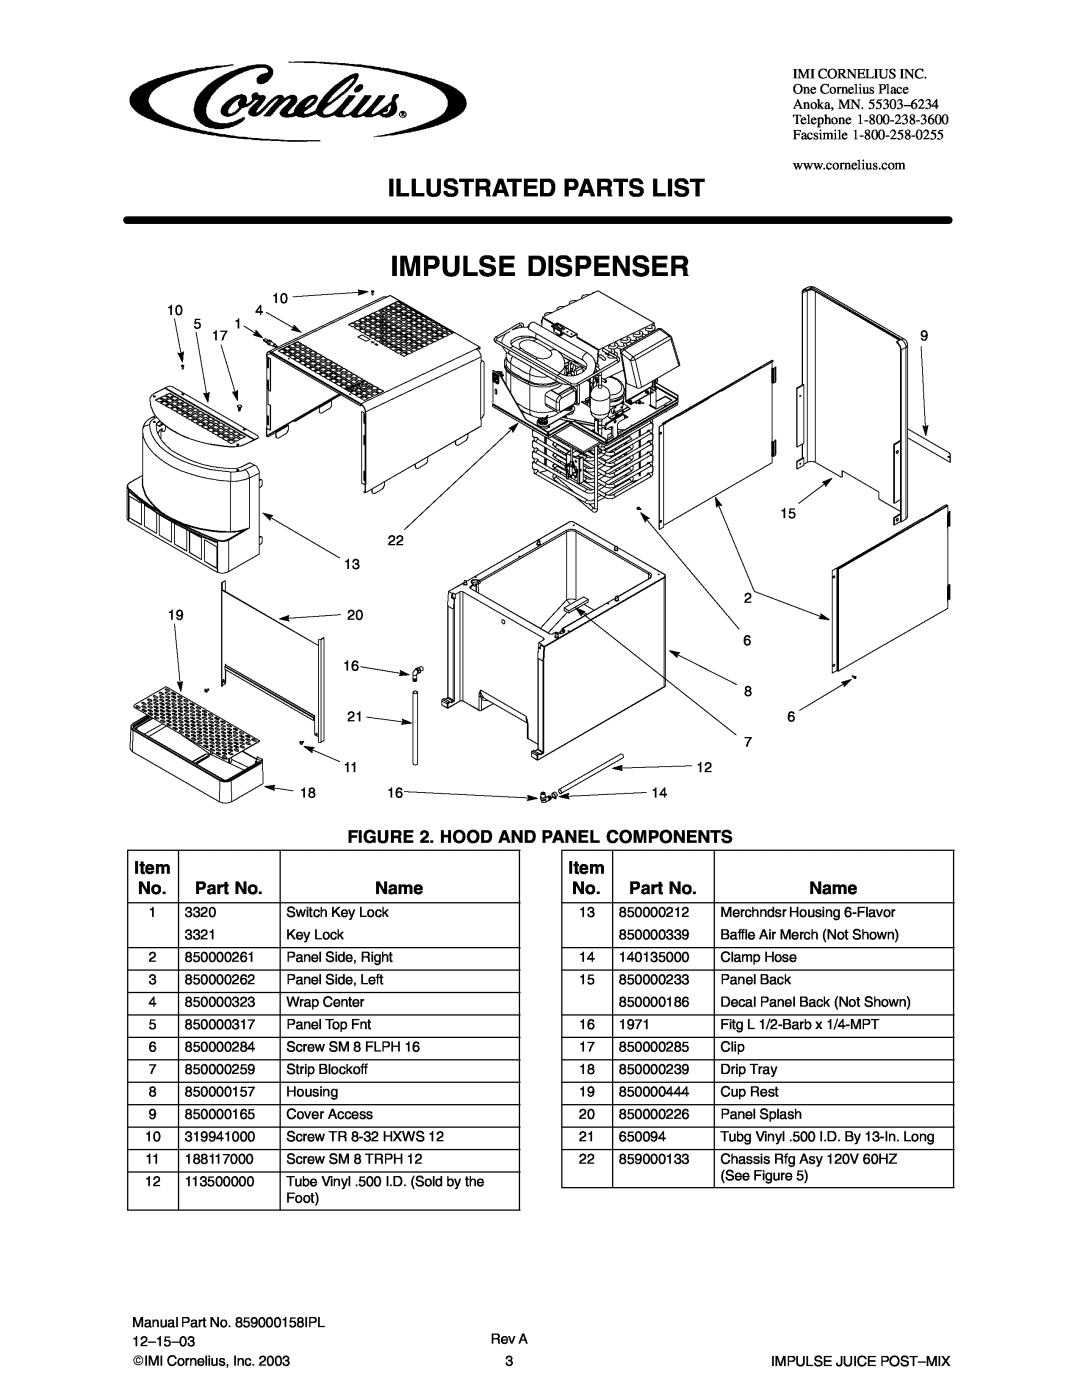 Panasonic 851000320, 851000110, 851000319 manual Impulse Dispenser, Illustrated Parts List, Hood And Panel Components, Name 